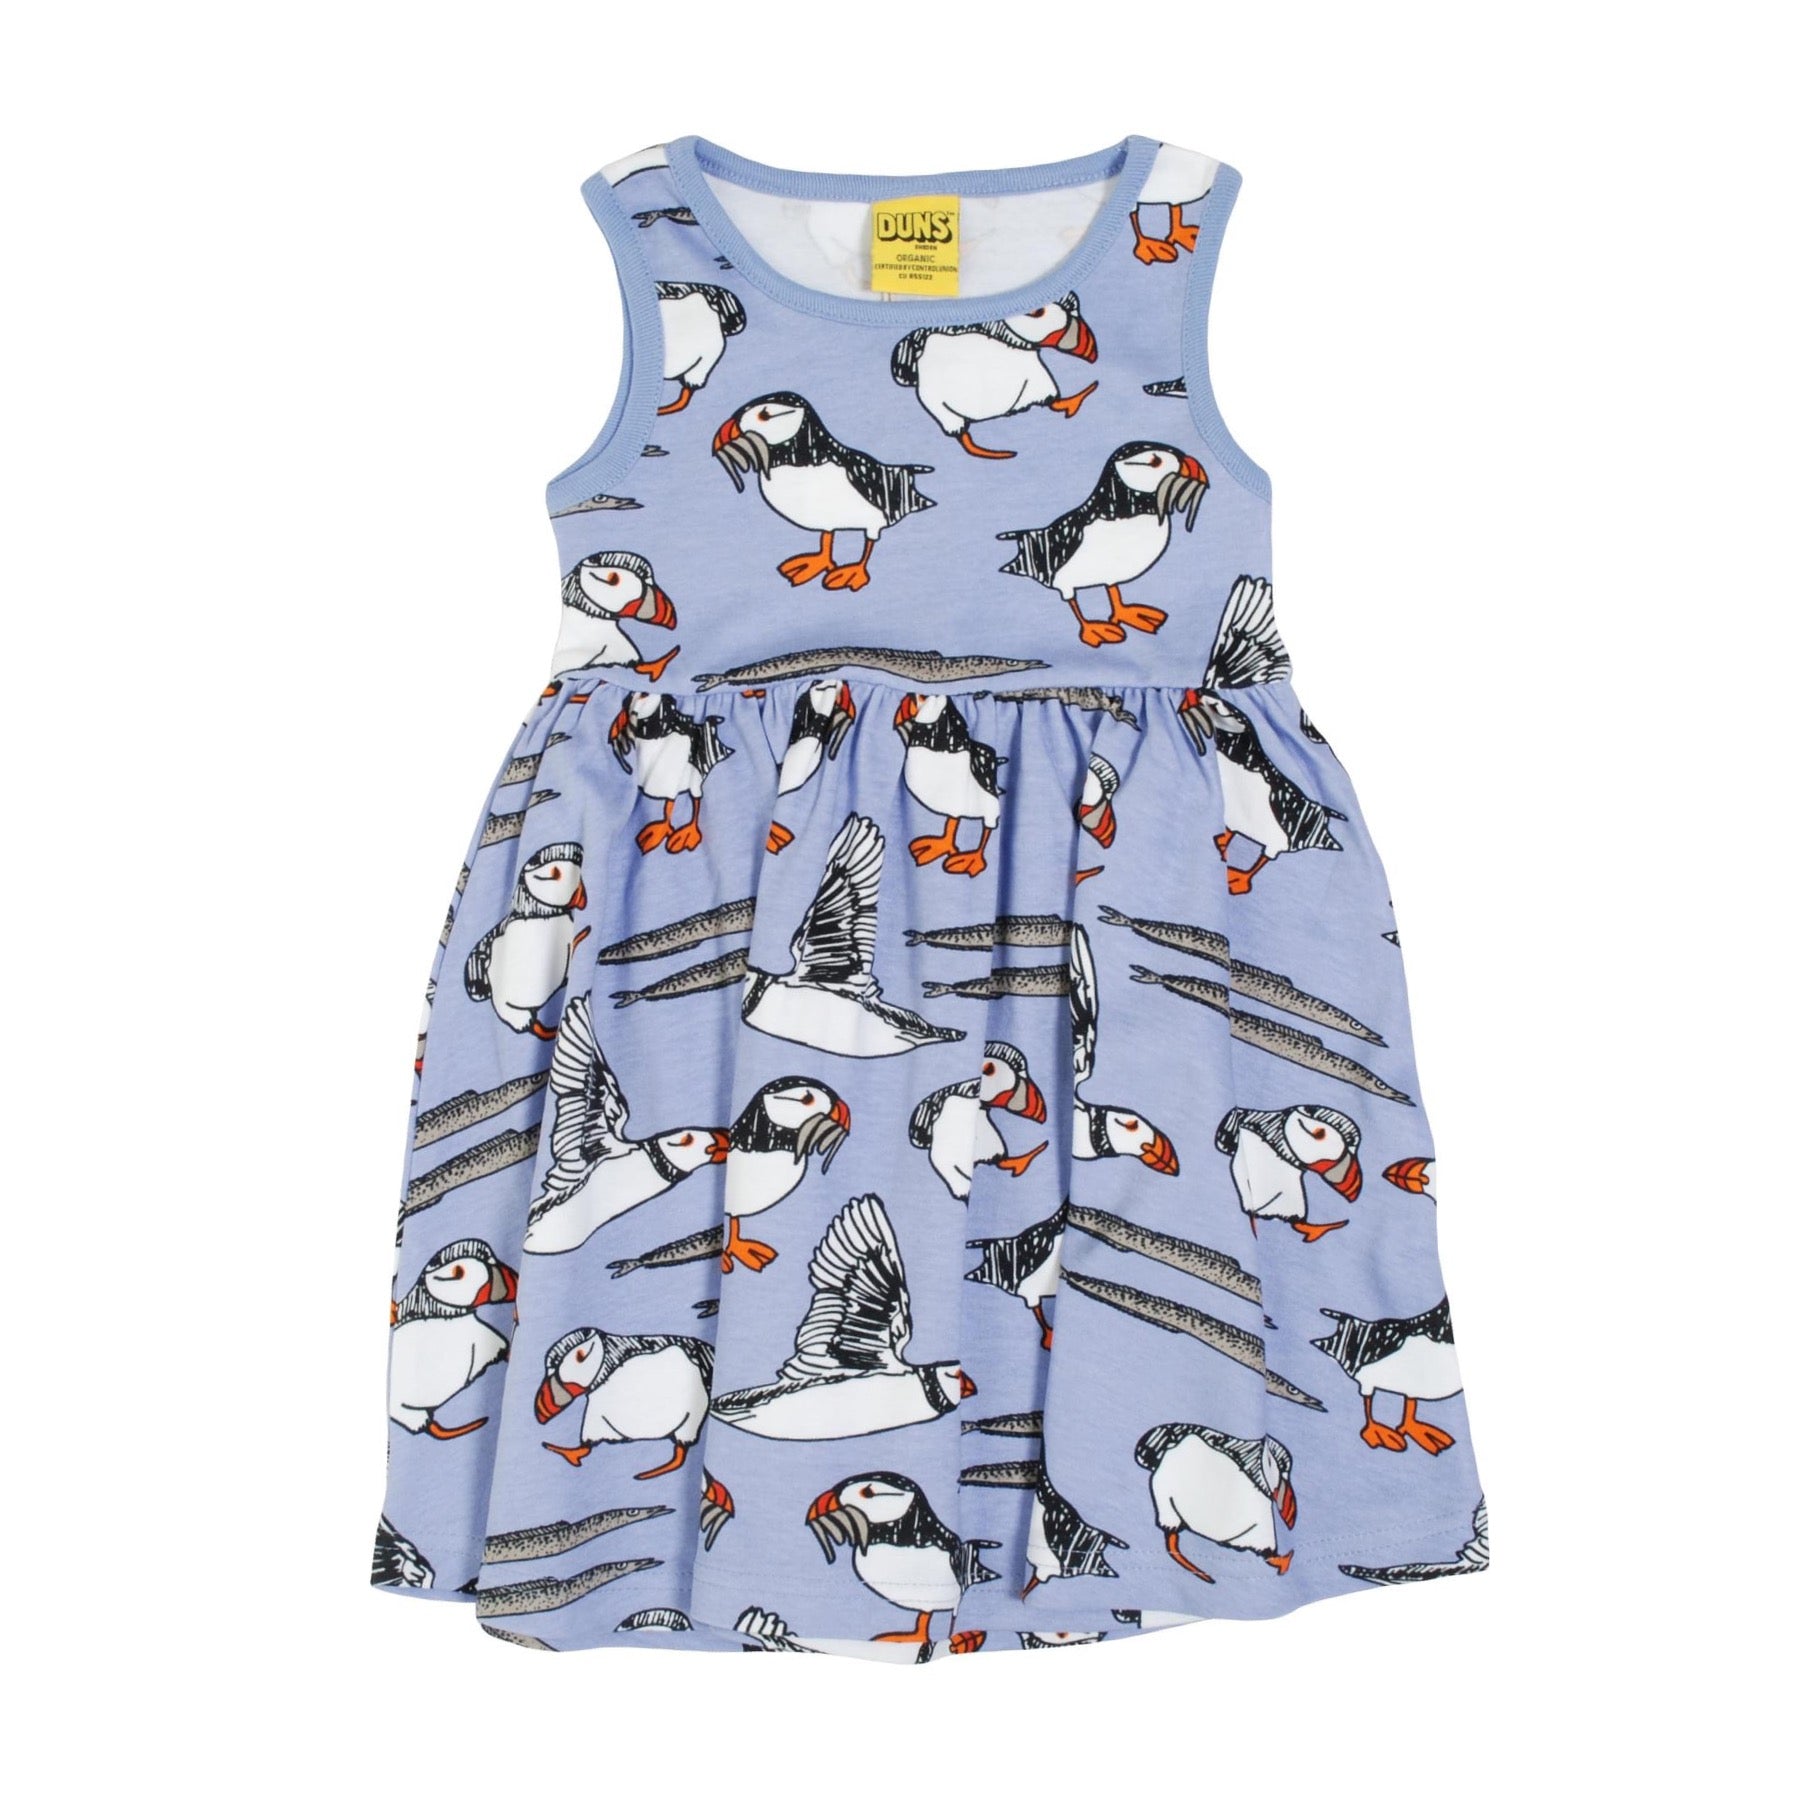 DUNS Sweden Dress Twirly Sleeveless Puffin Easter Egg